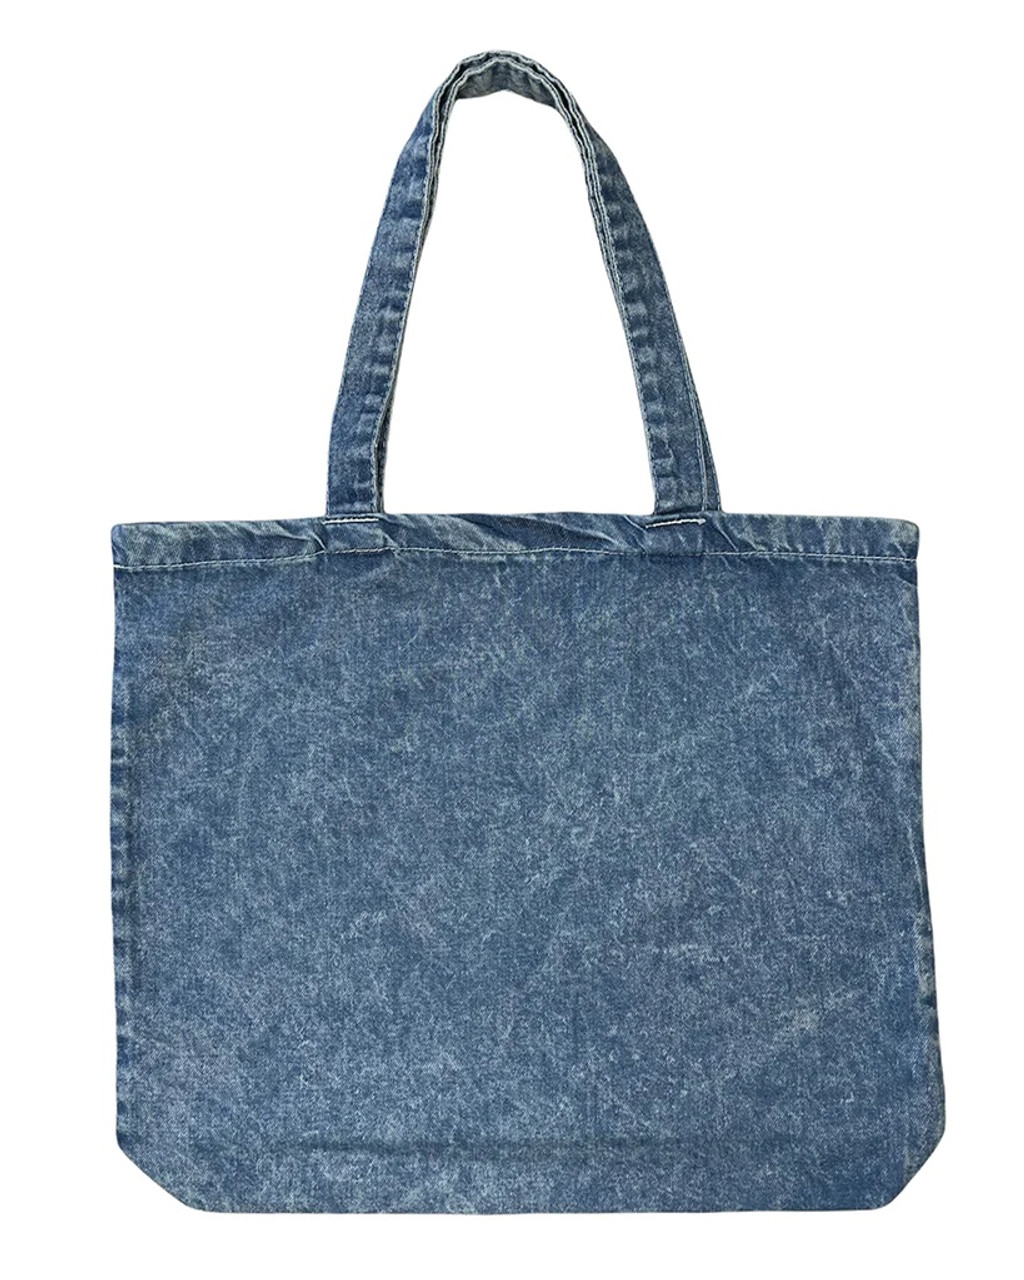 Petite Market Bag in Navy with Embroidery